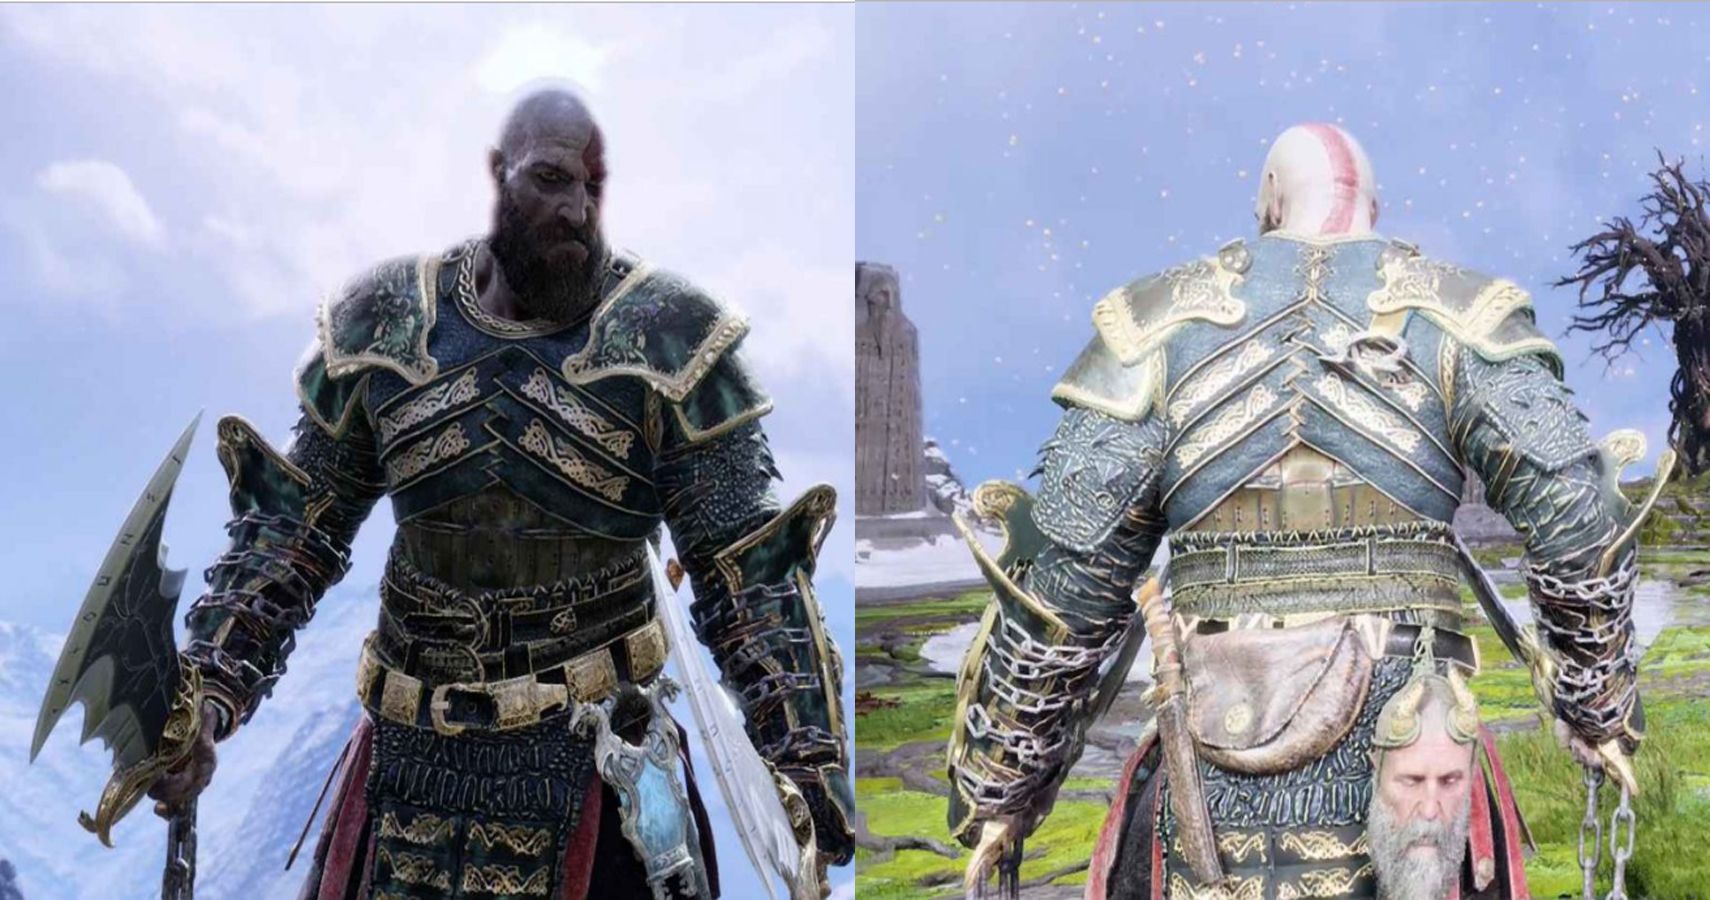 The Ivaldi's Endless Mist armor from God of War